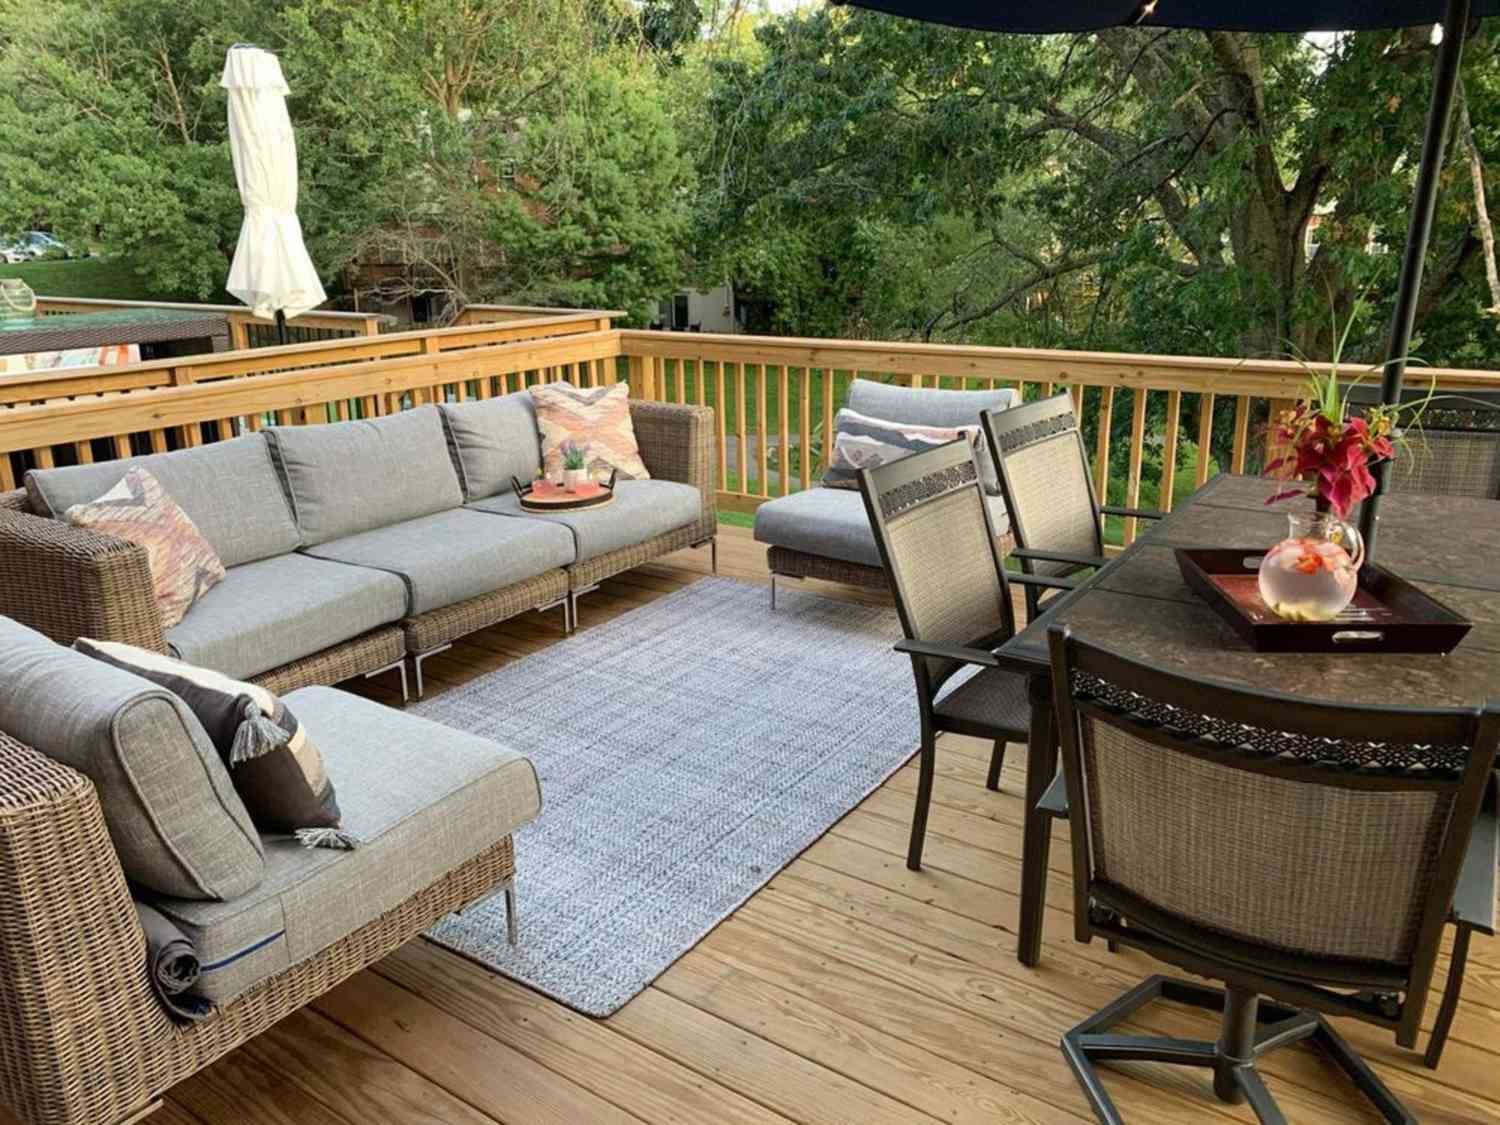 The 7 Best Outdoor Rugs of 2022 | Better Homes & Gardens